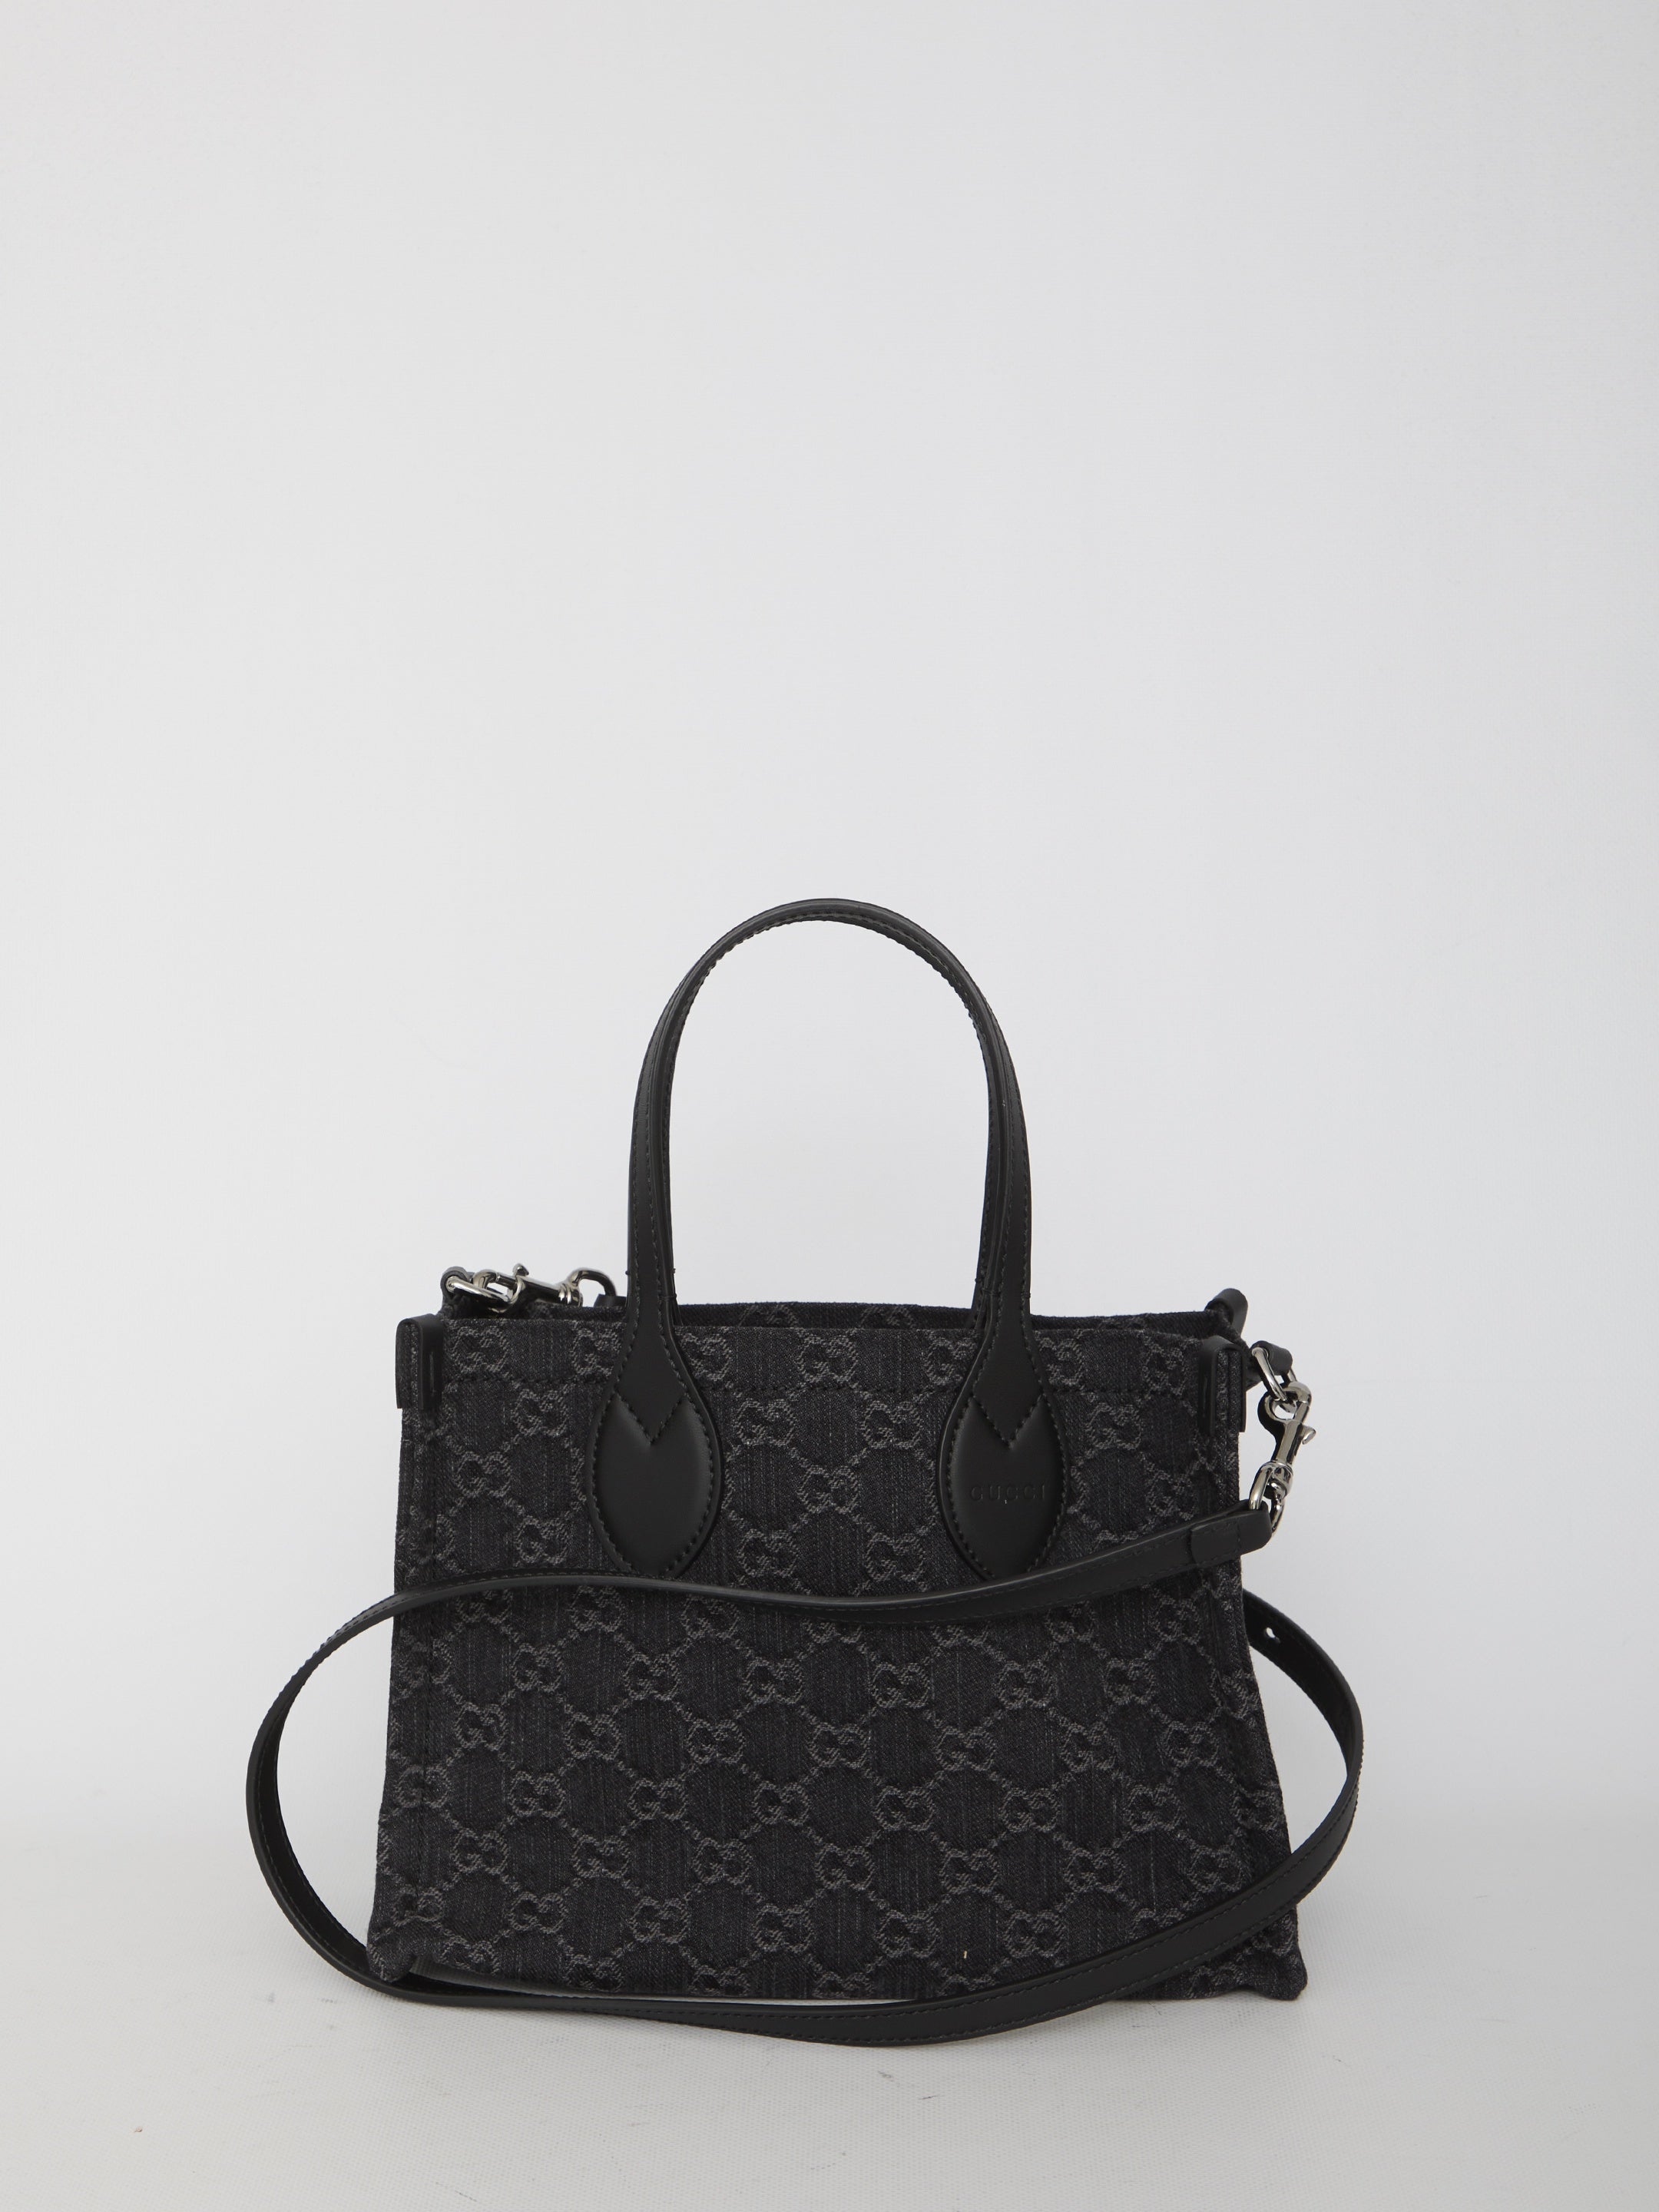 GUCCI-OUTLET-SALE-Ophidia-GG-shopping-bag-Taschen-QT-BLACK-ARCHIVE-COLLECTION.jpg